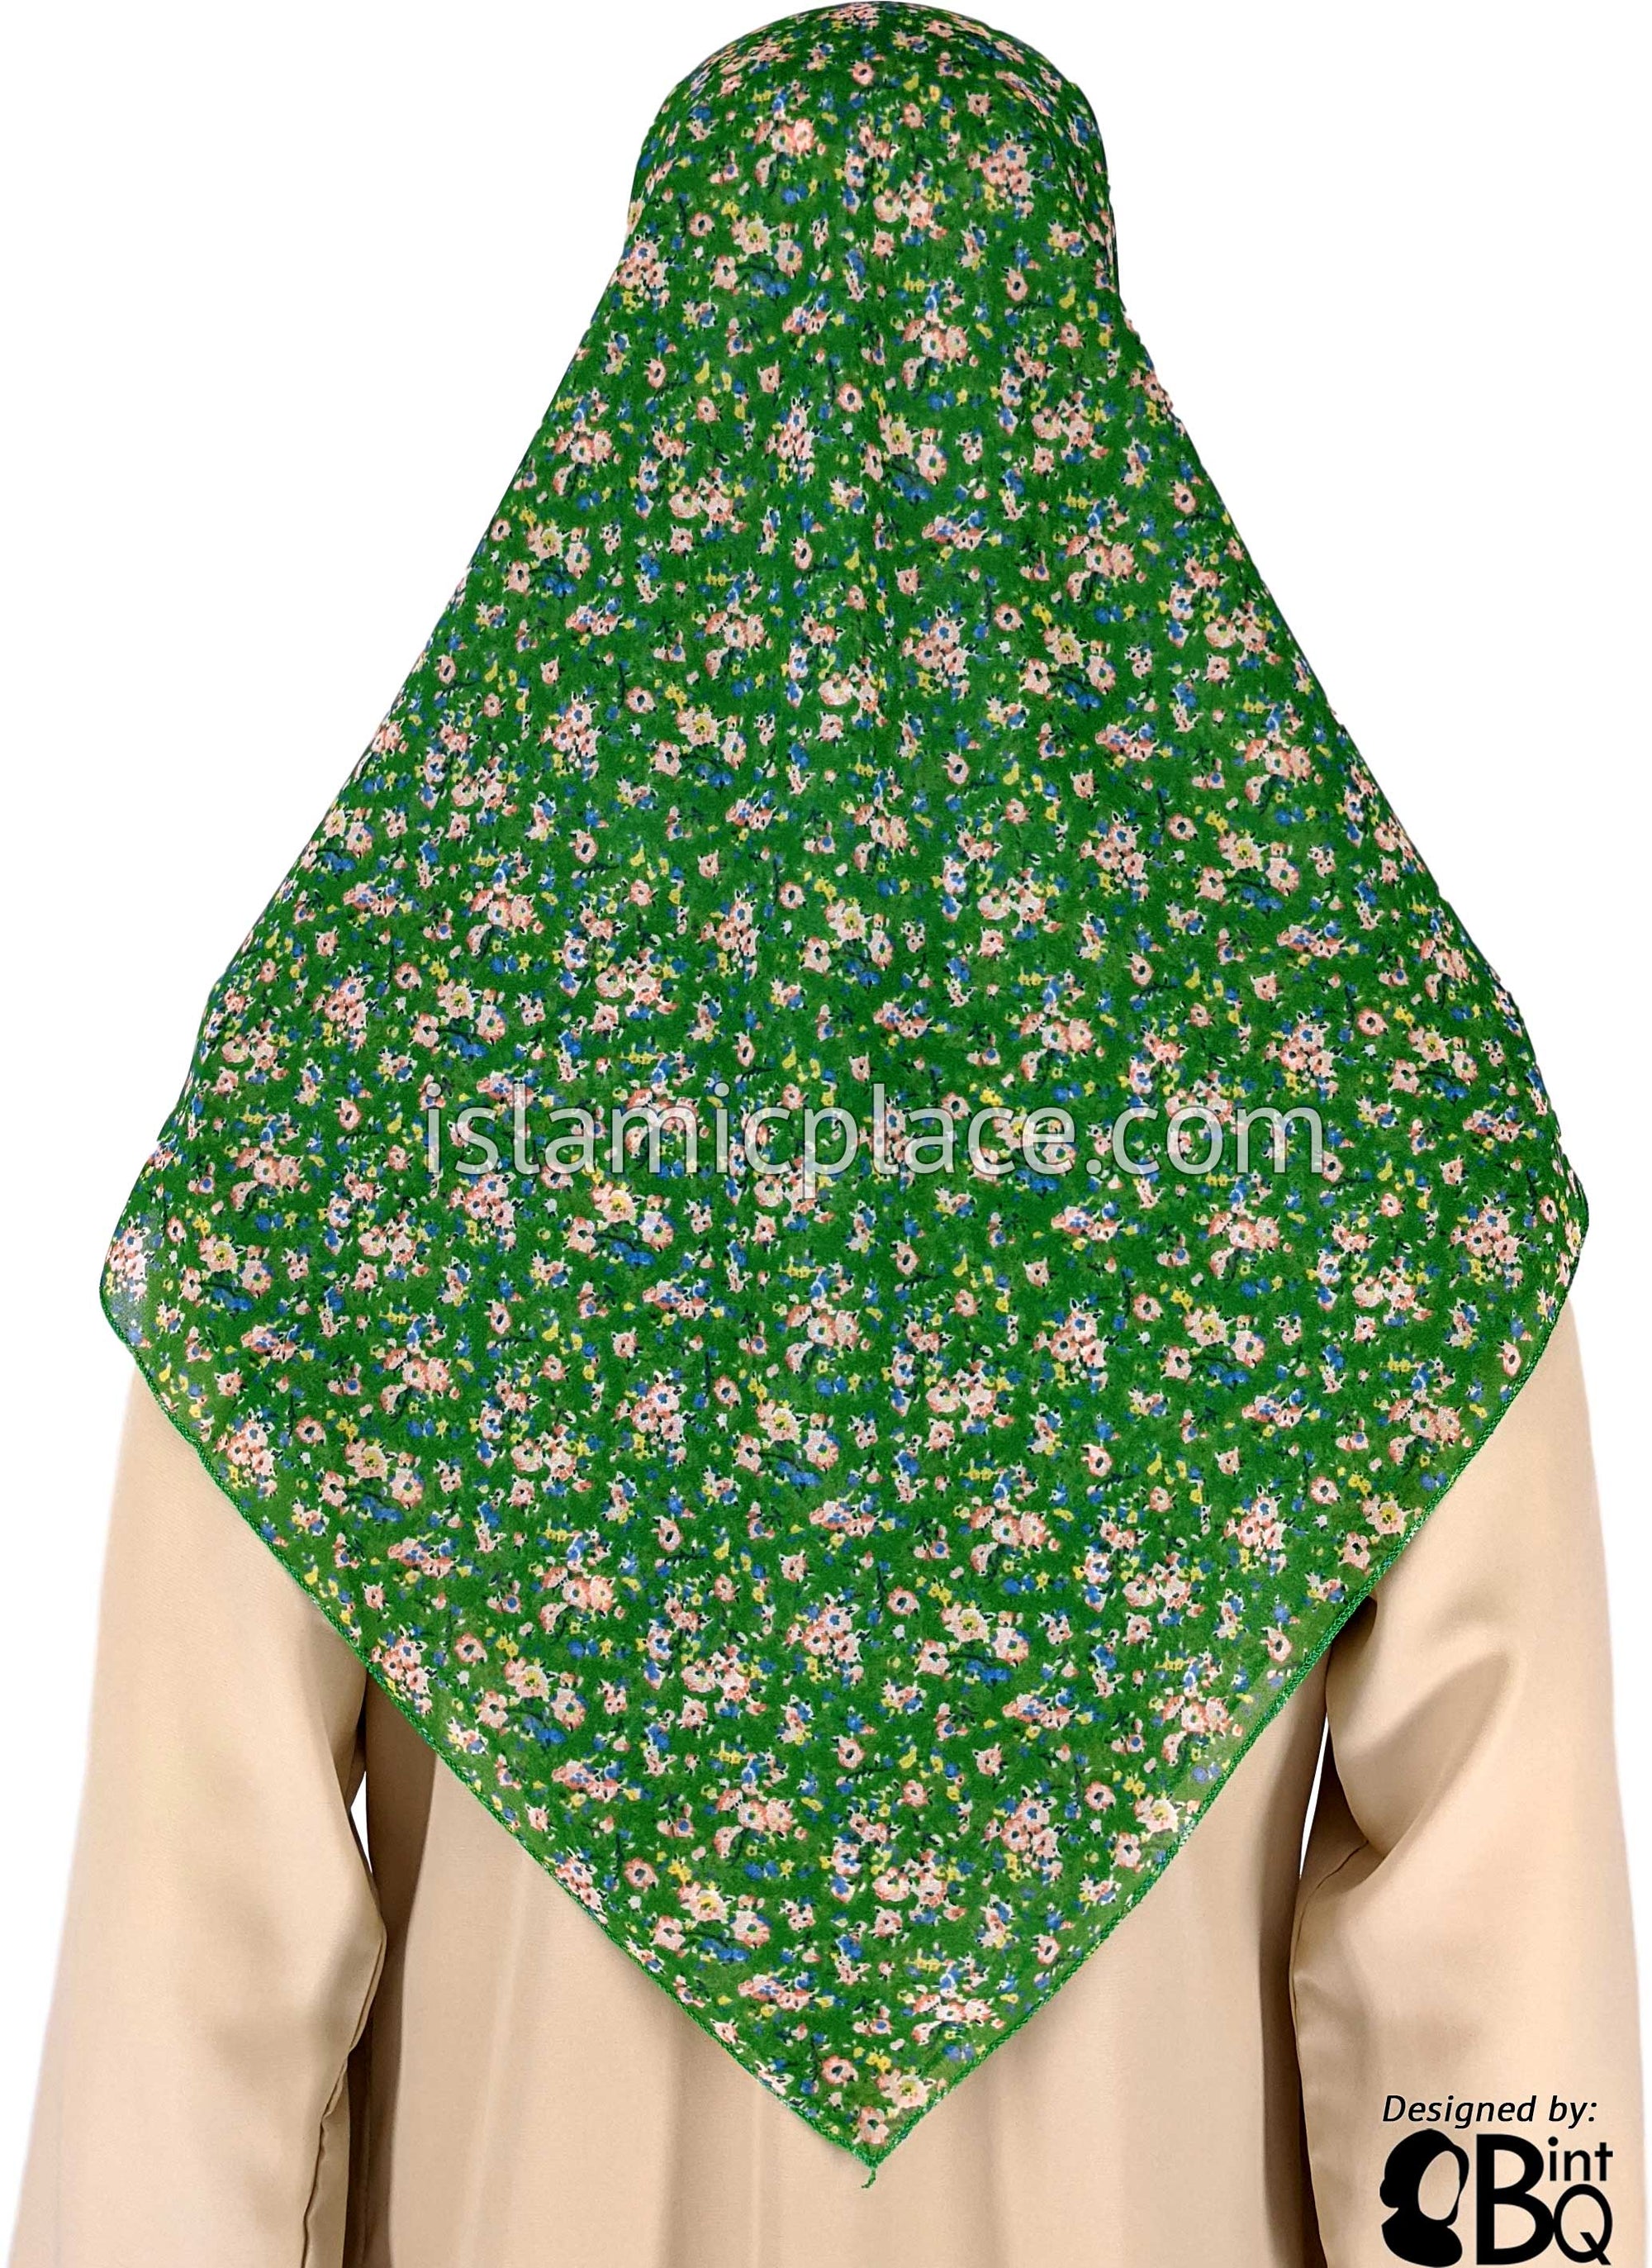 Pink White And Blue Flower Bunches On Green - 45" Square Printed Khimar